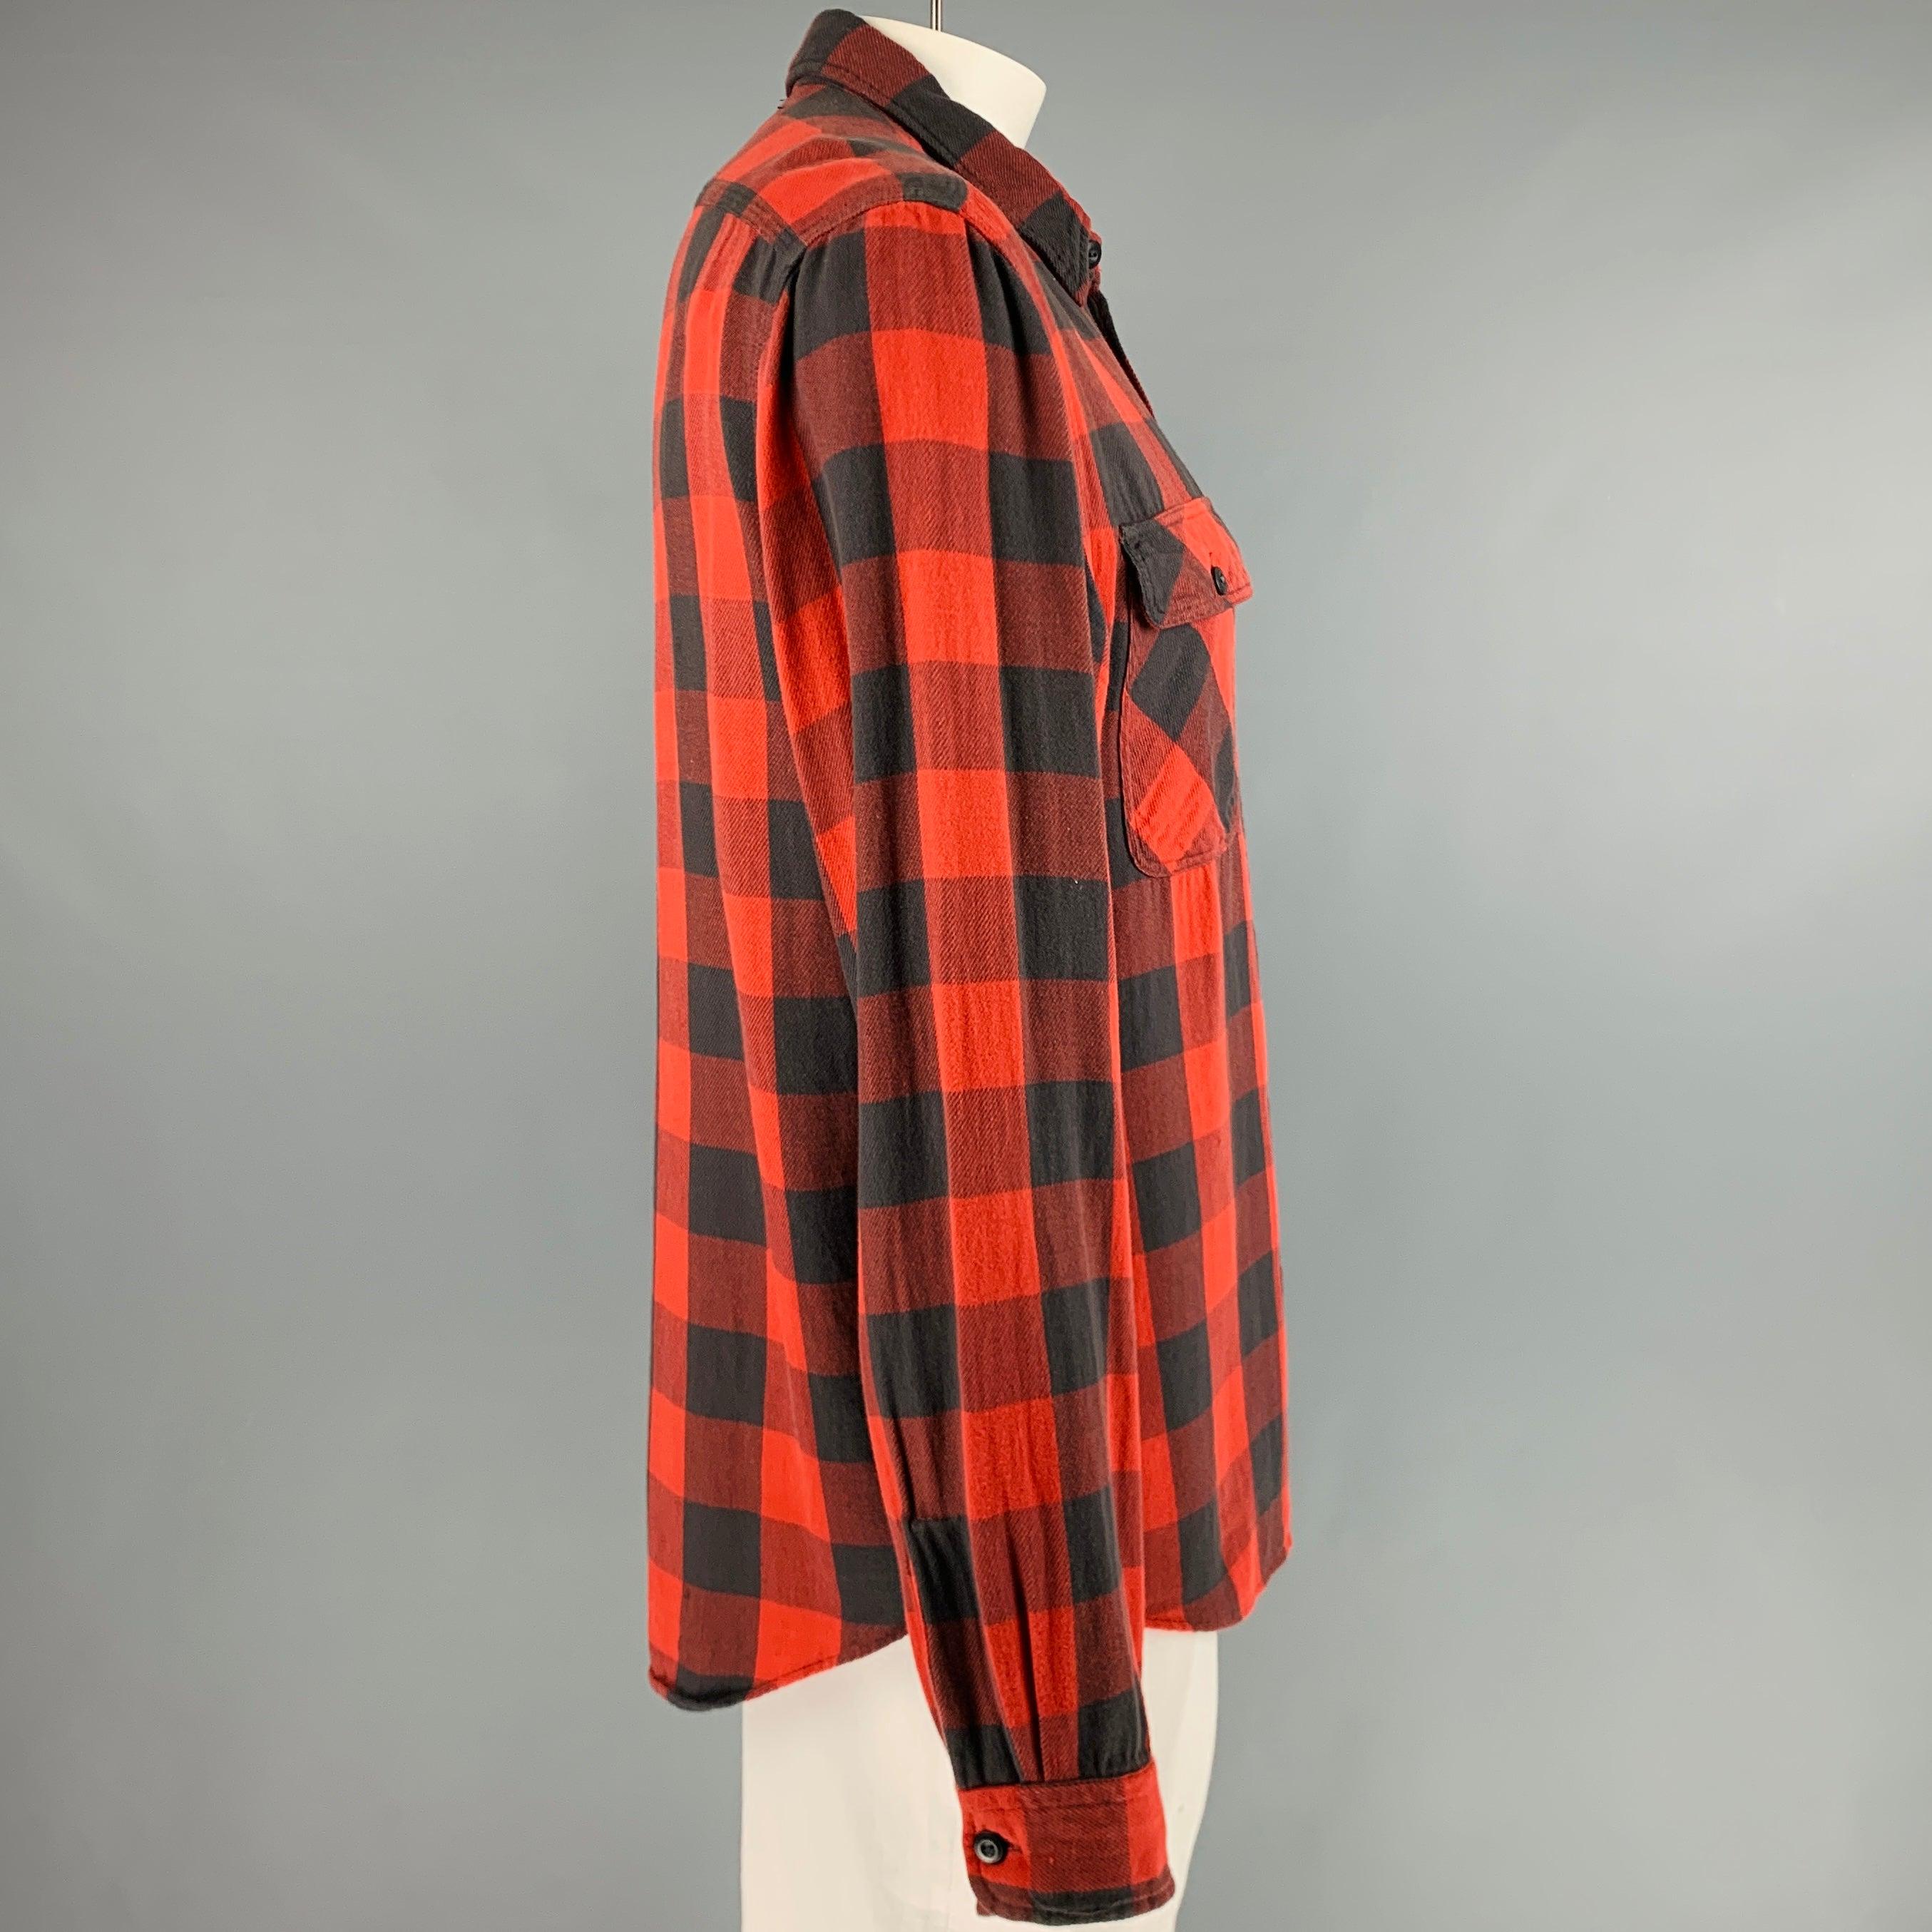 RRL by RALPH LAUREN long sleeve shirt
in a
red and black cotton fabric featuring buffalo plaid pattern, two pockets, and a button closure. Very Good Pre-Owned Condition. Minor signs of wear. 

Marked:   L 

Measurements: 
 
Shoulder: 17.5 inches